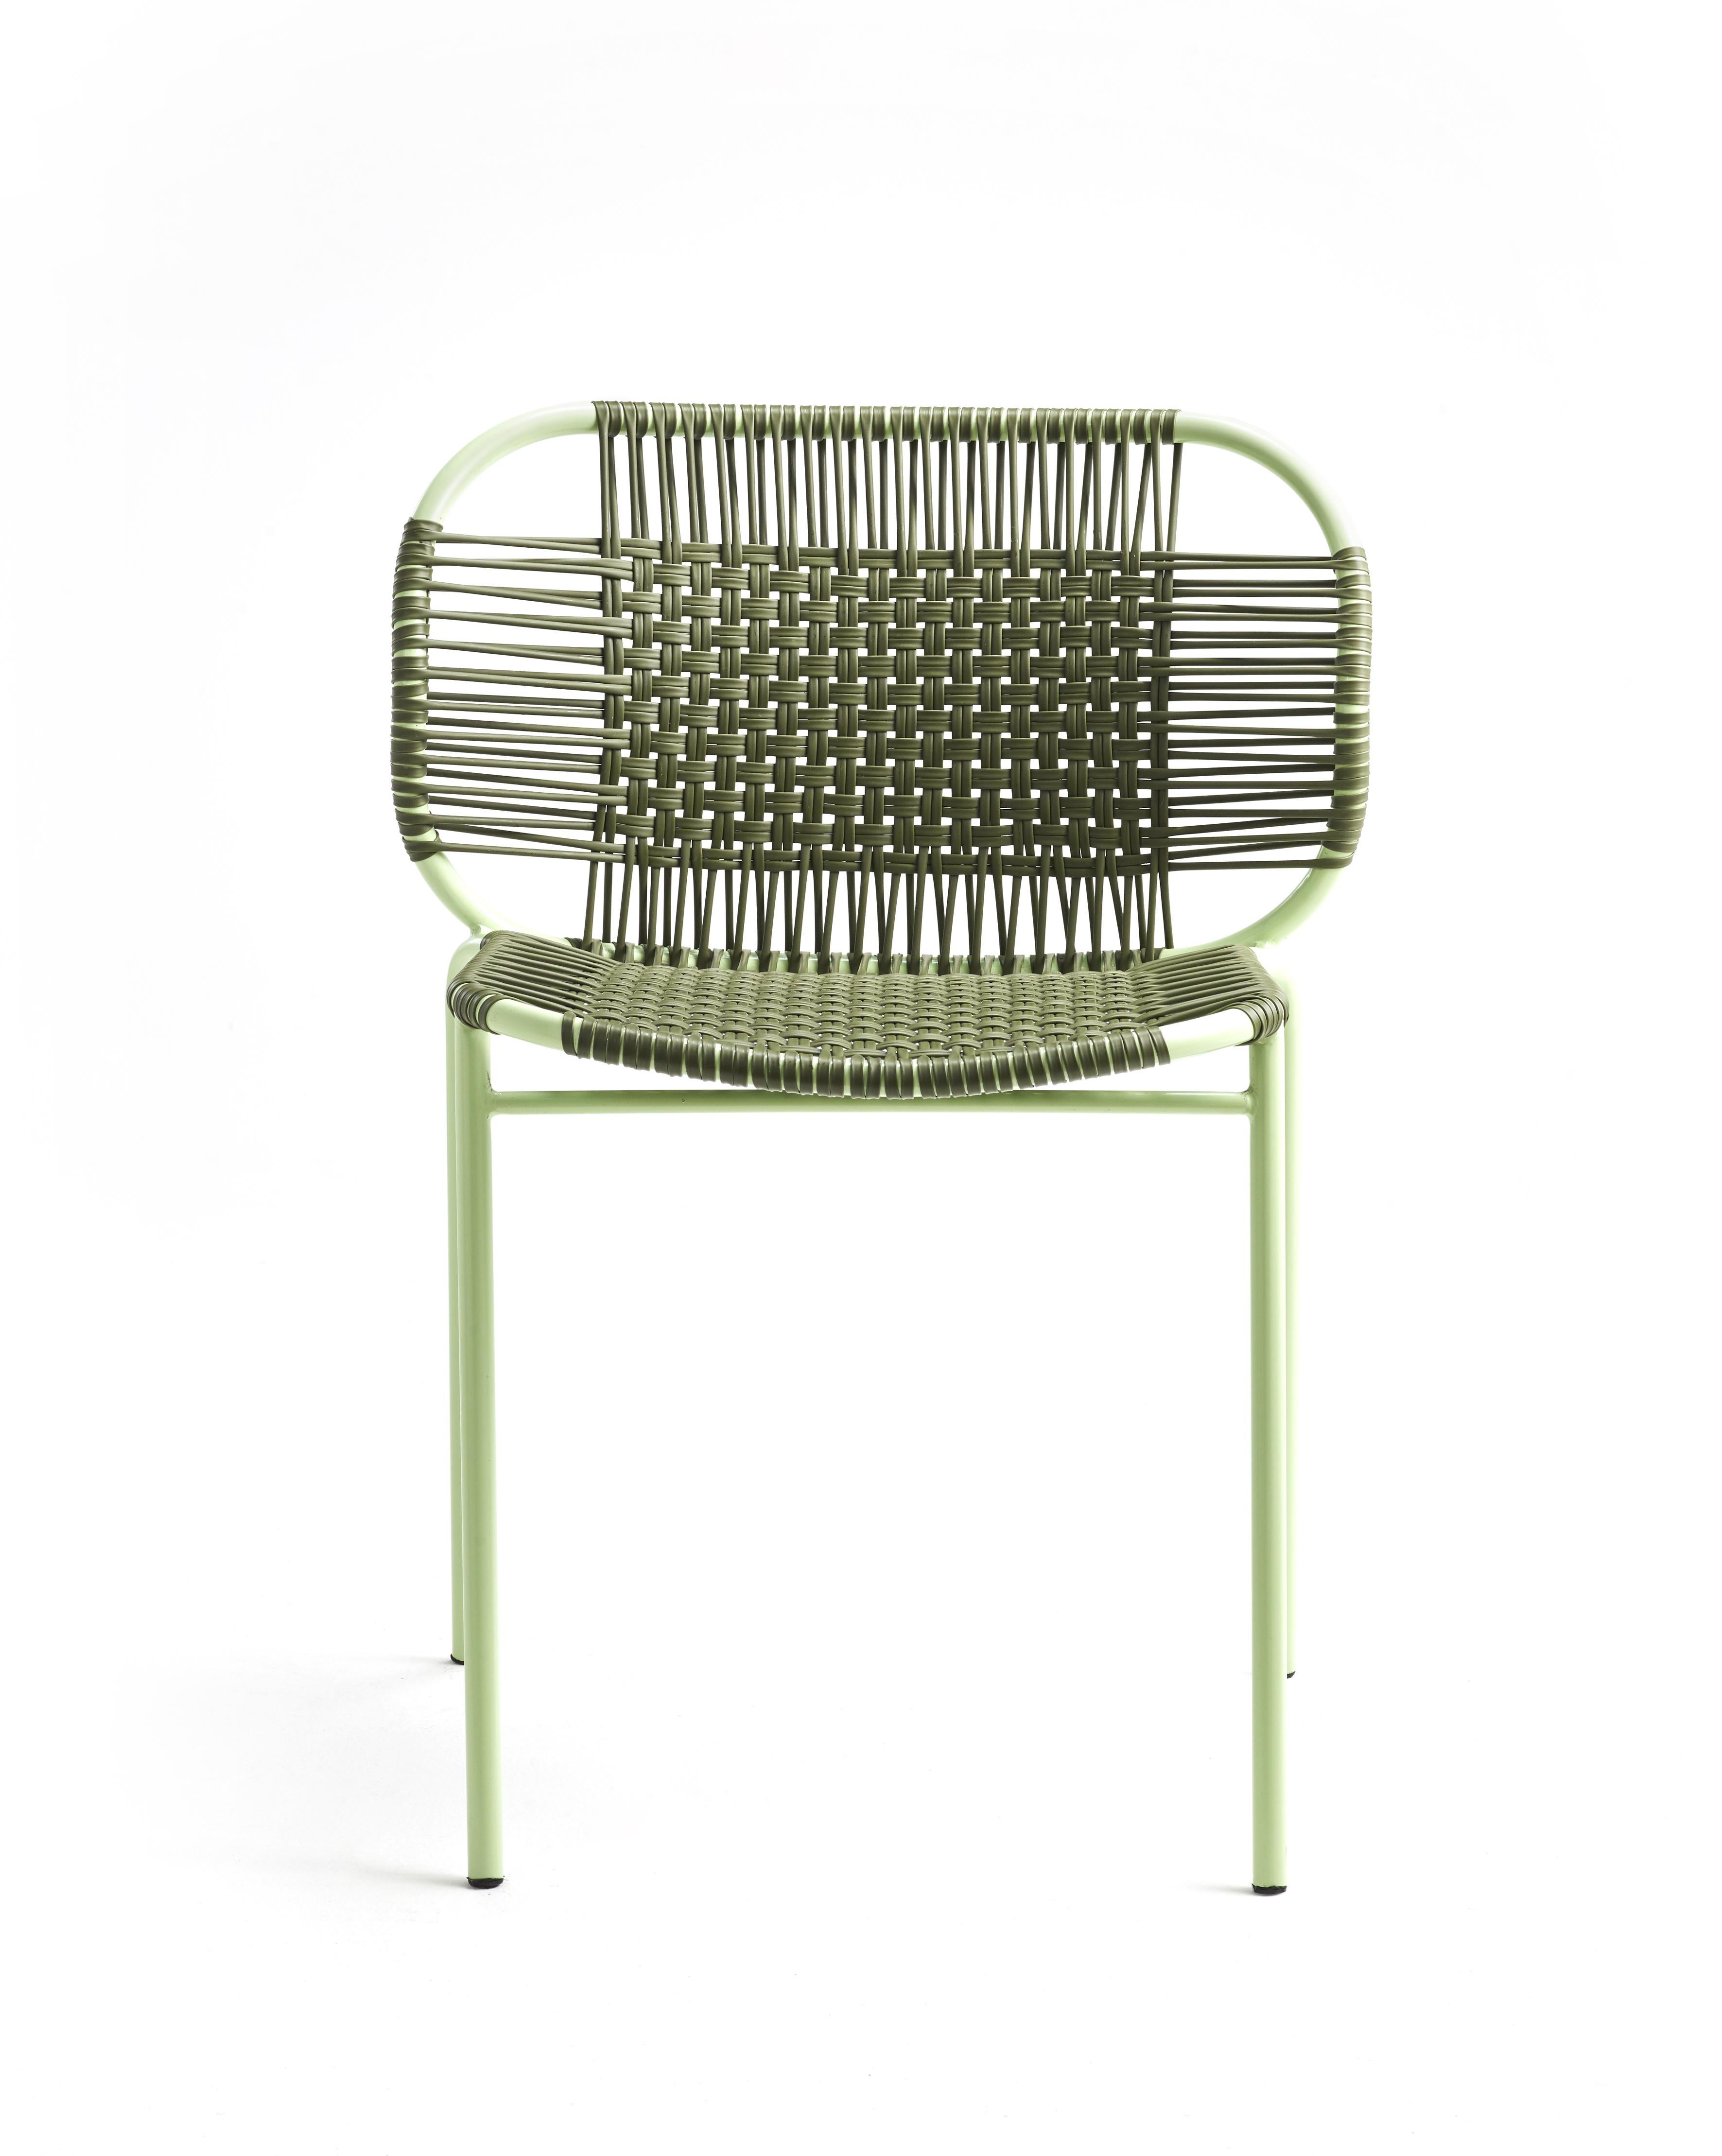 Set of 2 olive cielo stacking chair by Sebastian Herkner
Materials: PVC strings, powder-coated steel frame. 
Technique: made from recycled plastic and weaved by local craftspeople in Cartagena, Colombia. 
Dimensions: W 56 x D 51.4 x H 78 cm